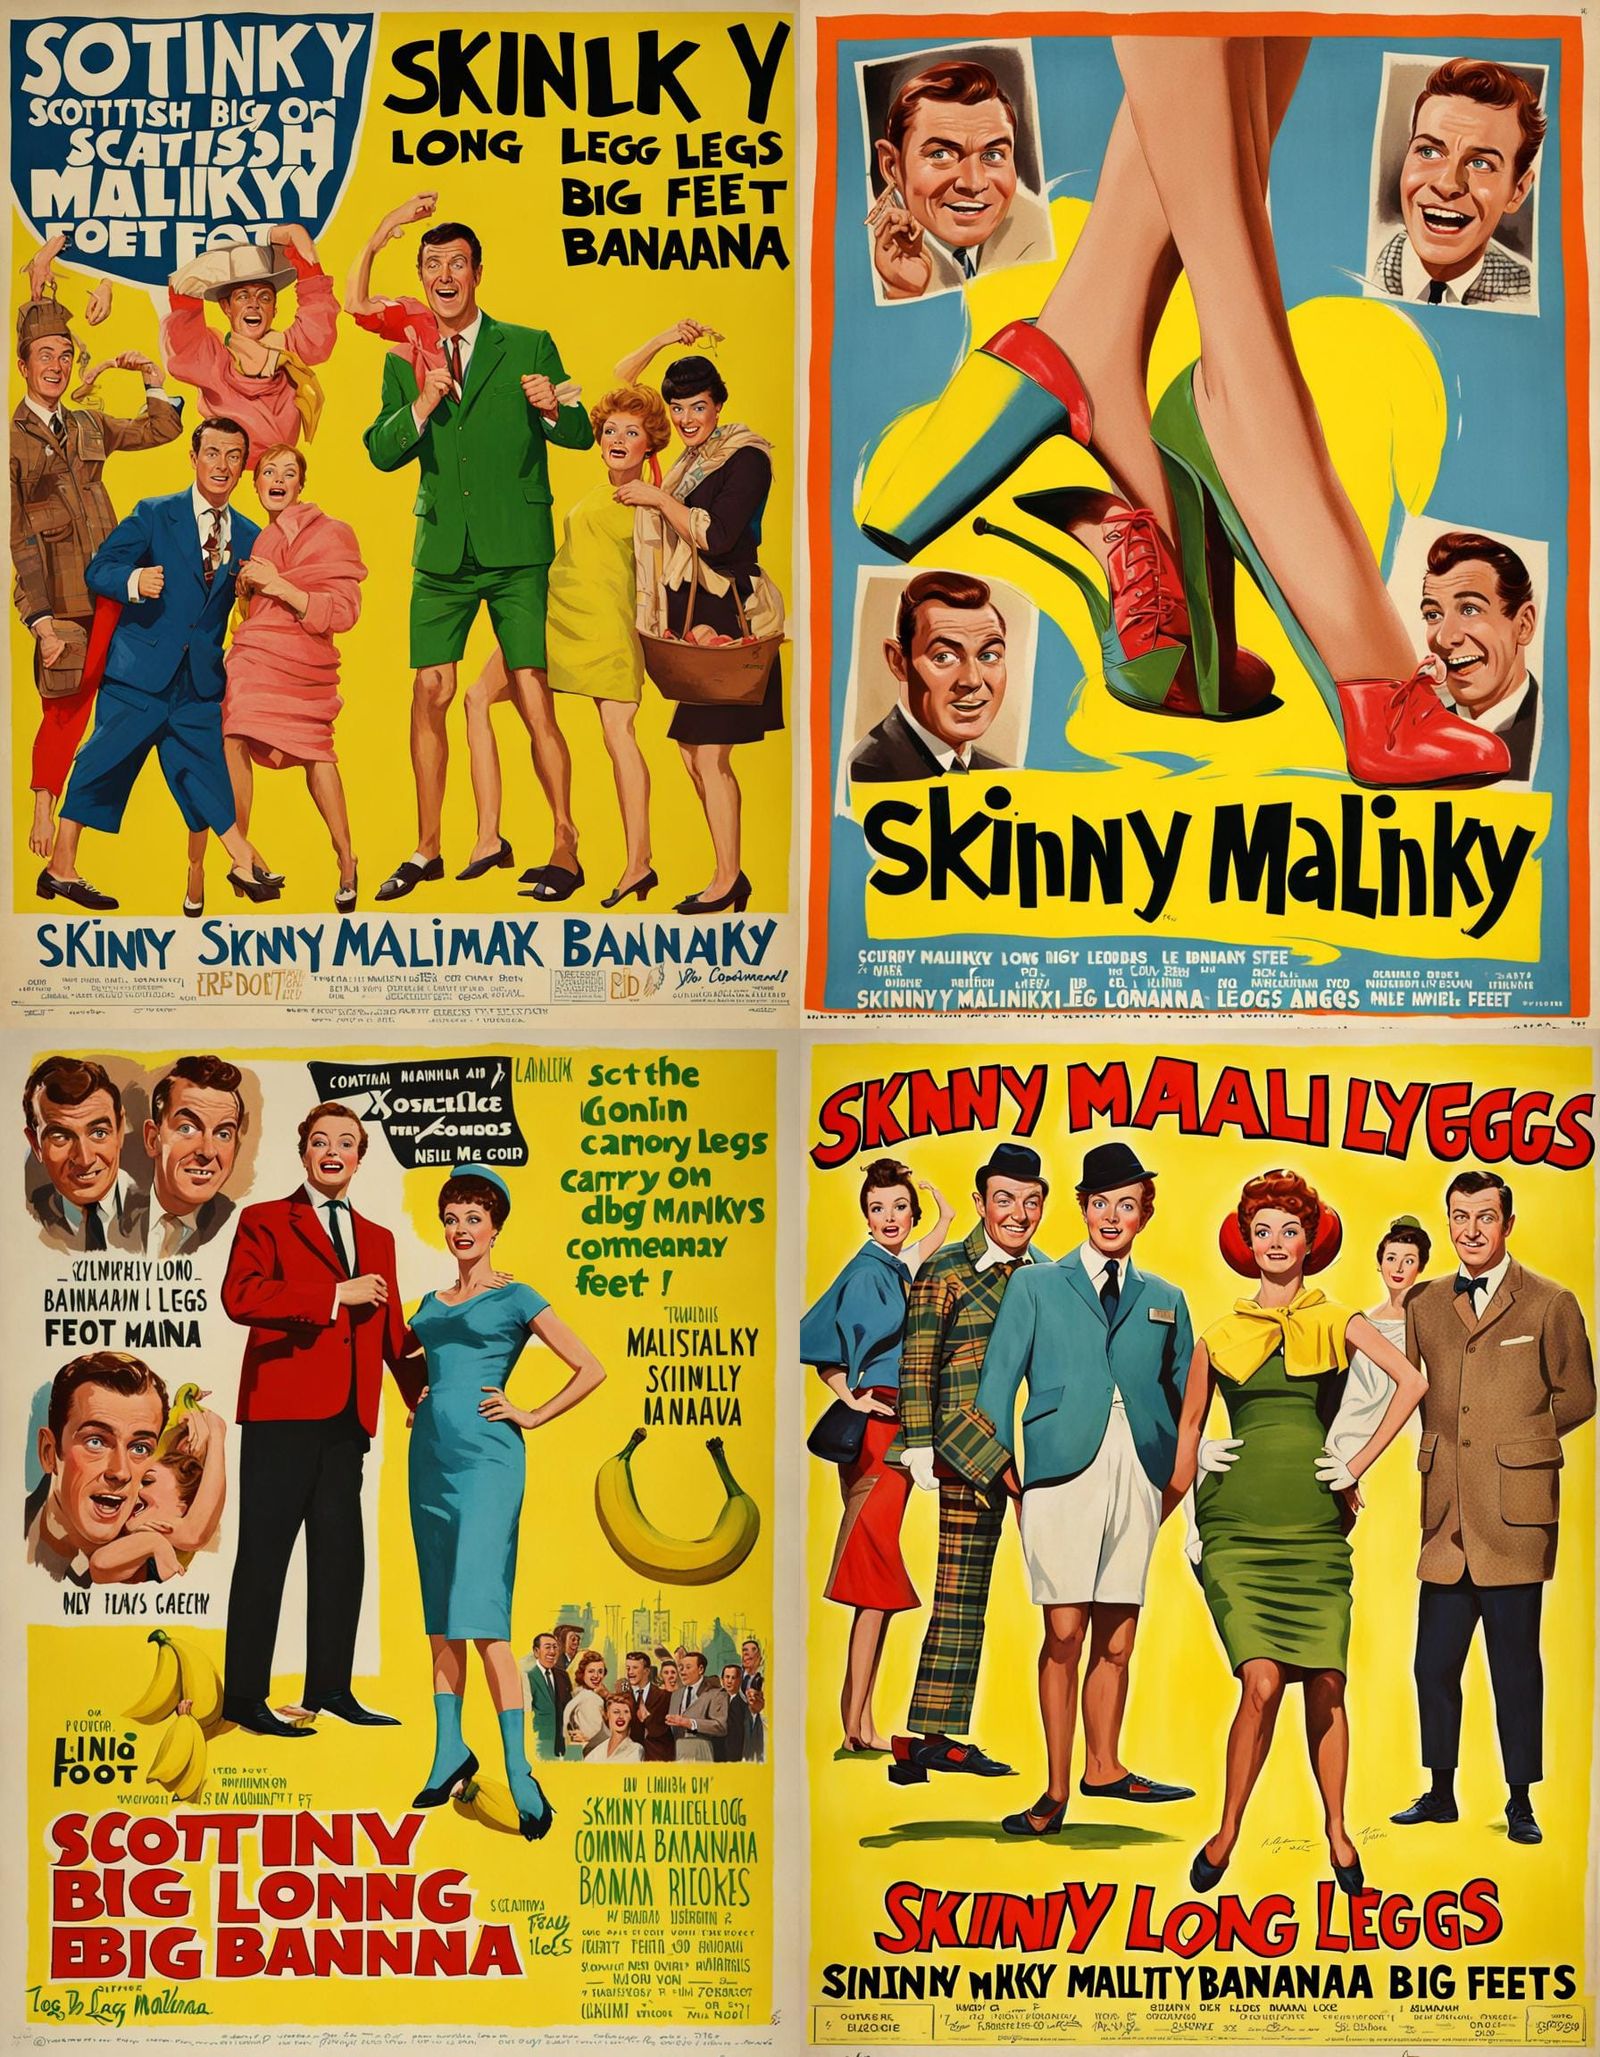 1960 Scottish Carry On style comedy movie poster "Skinny Malinky Long